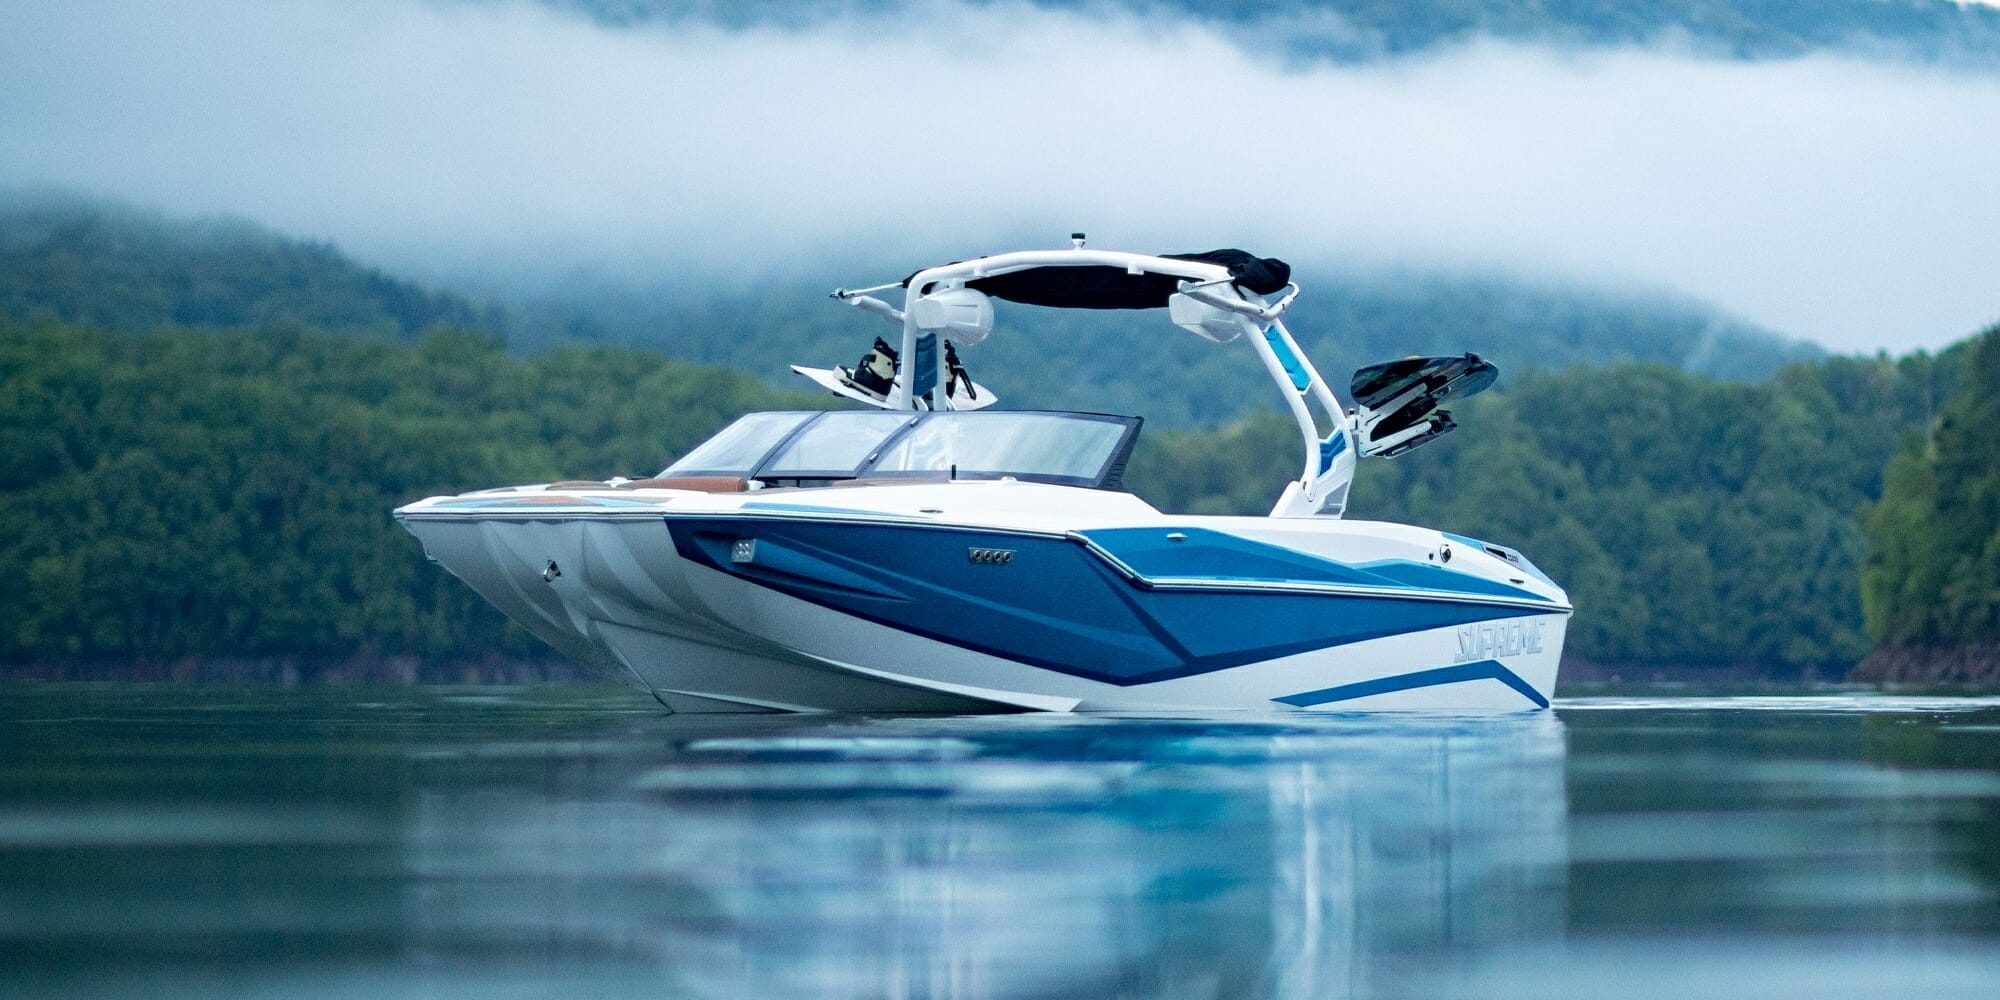 A SUPREME blue and white speed boat on a body of water.